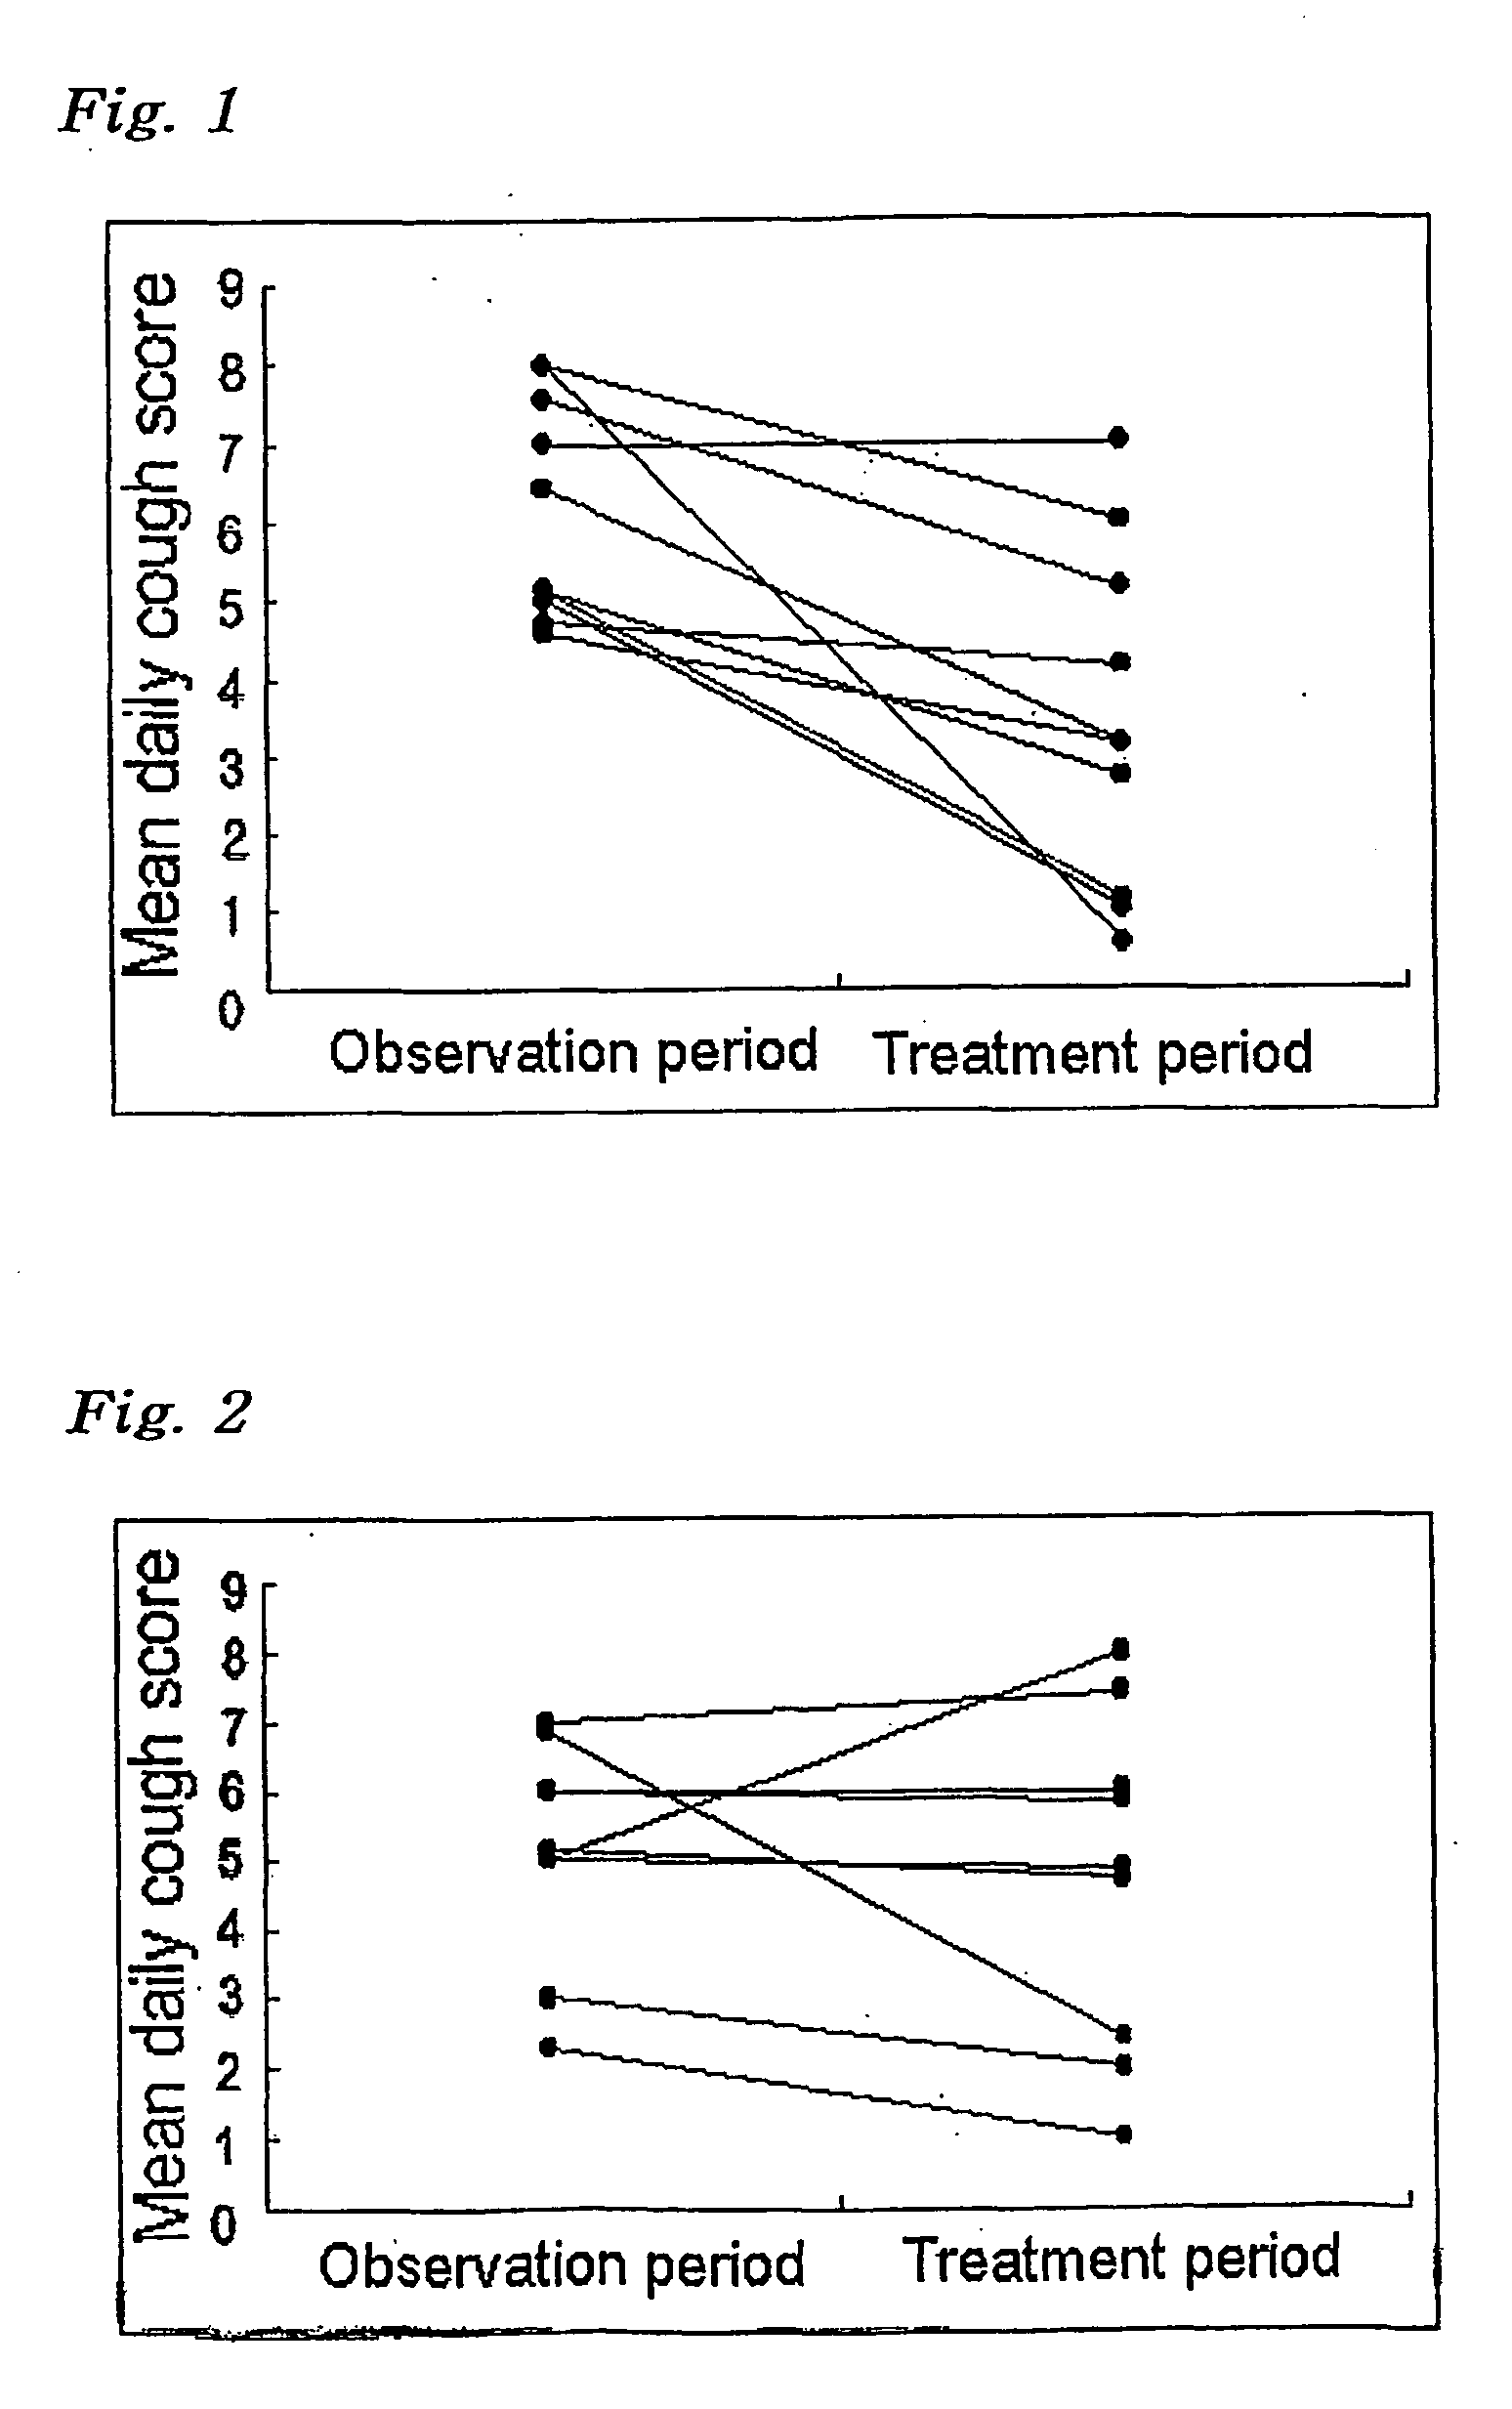 Cough depressant composition containing iron for angiotensin-converting enzyme inhibitor inducing cough